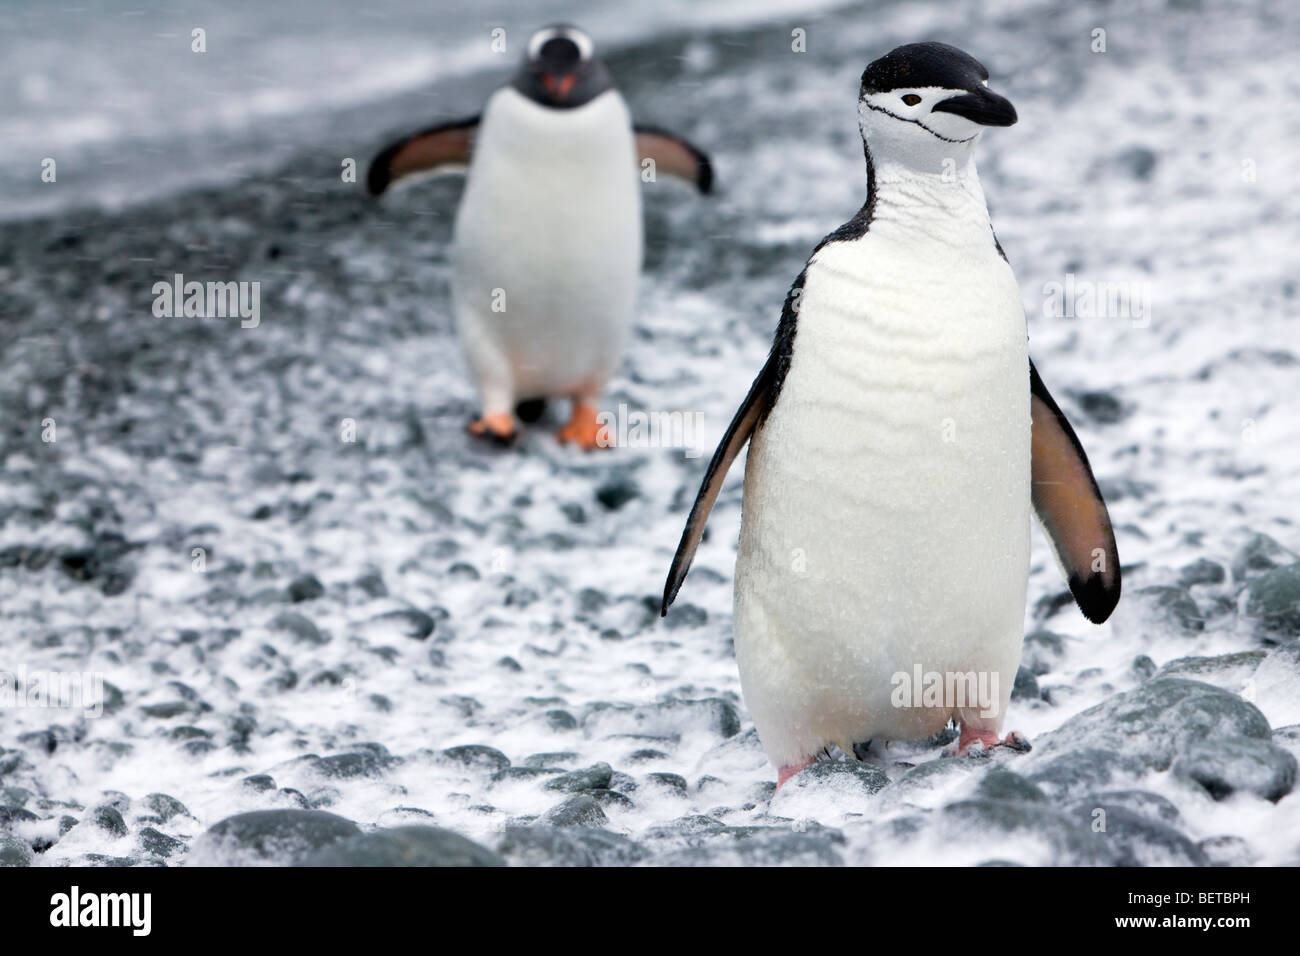 Close-up Chinstrap penguin standing on snowy rock beach, eye contact, Adelie penguin walking up from water background South Orkney Islands, Antarctica Stock Photo